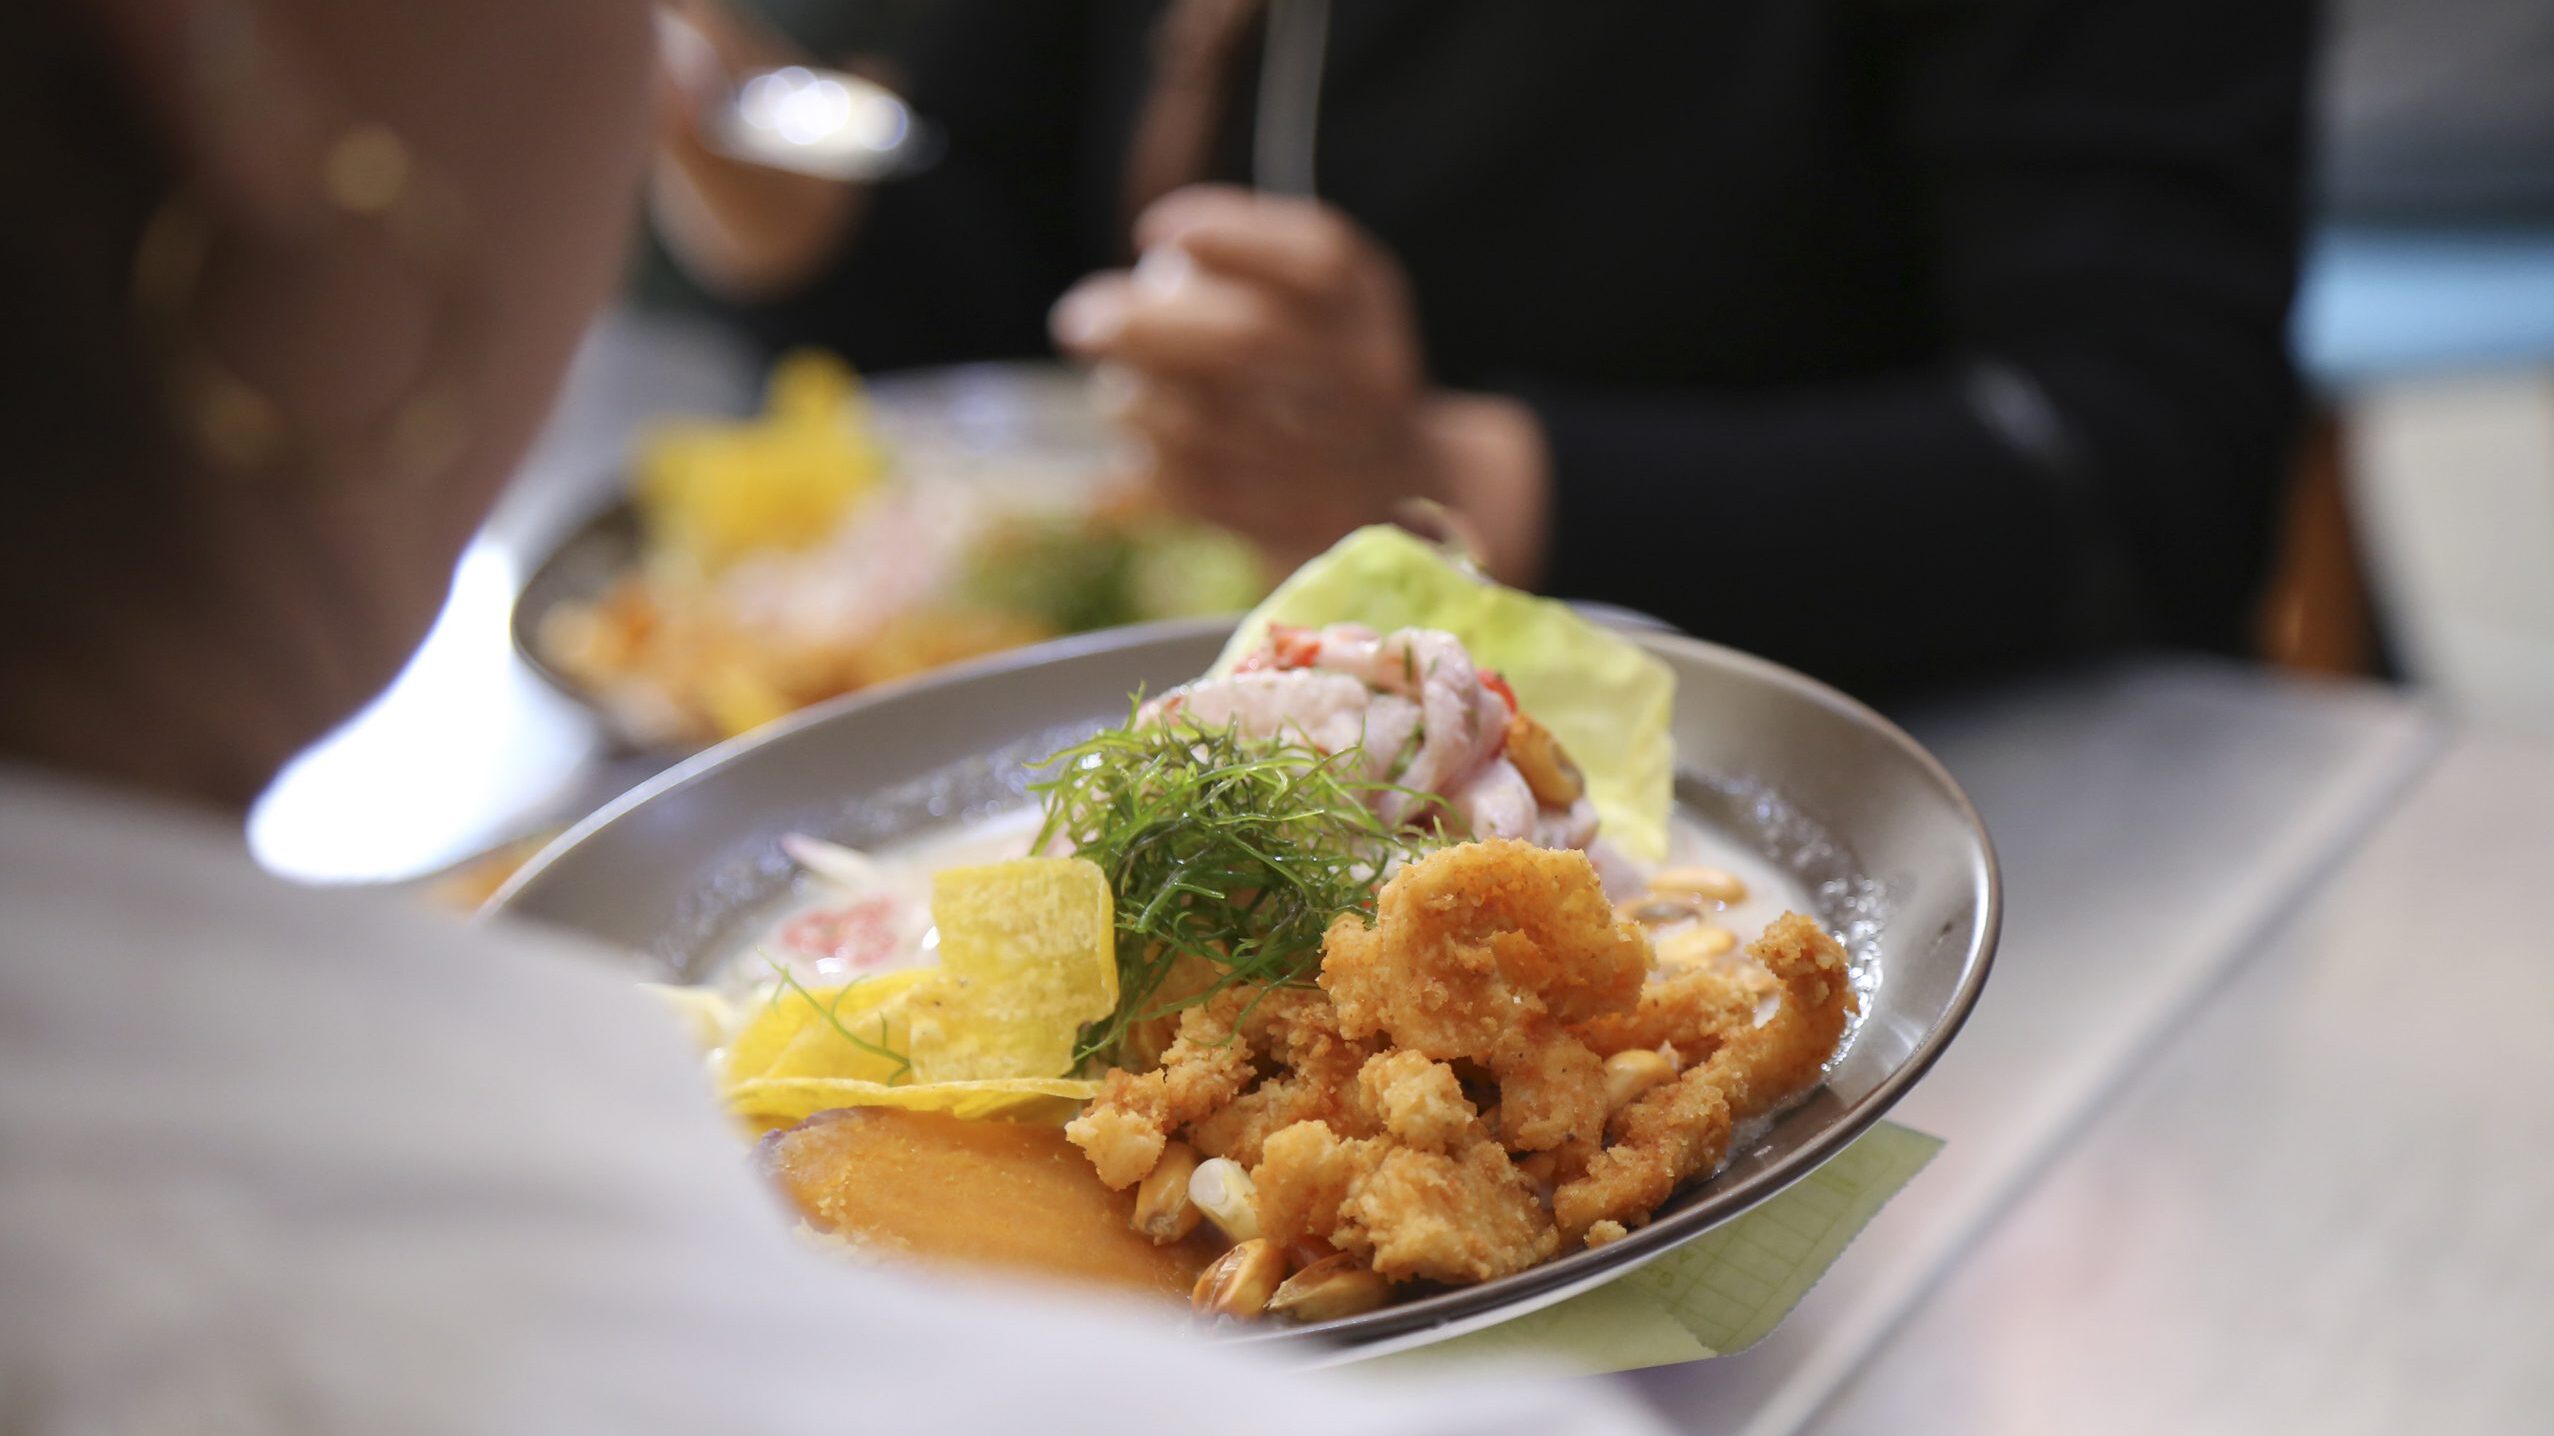 Combination of ceviche with chicharron of fish and seafood